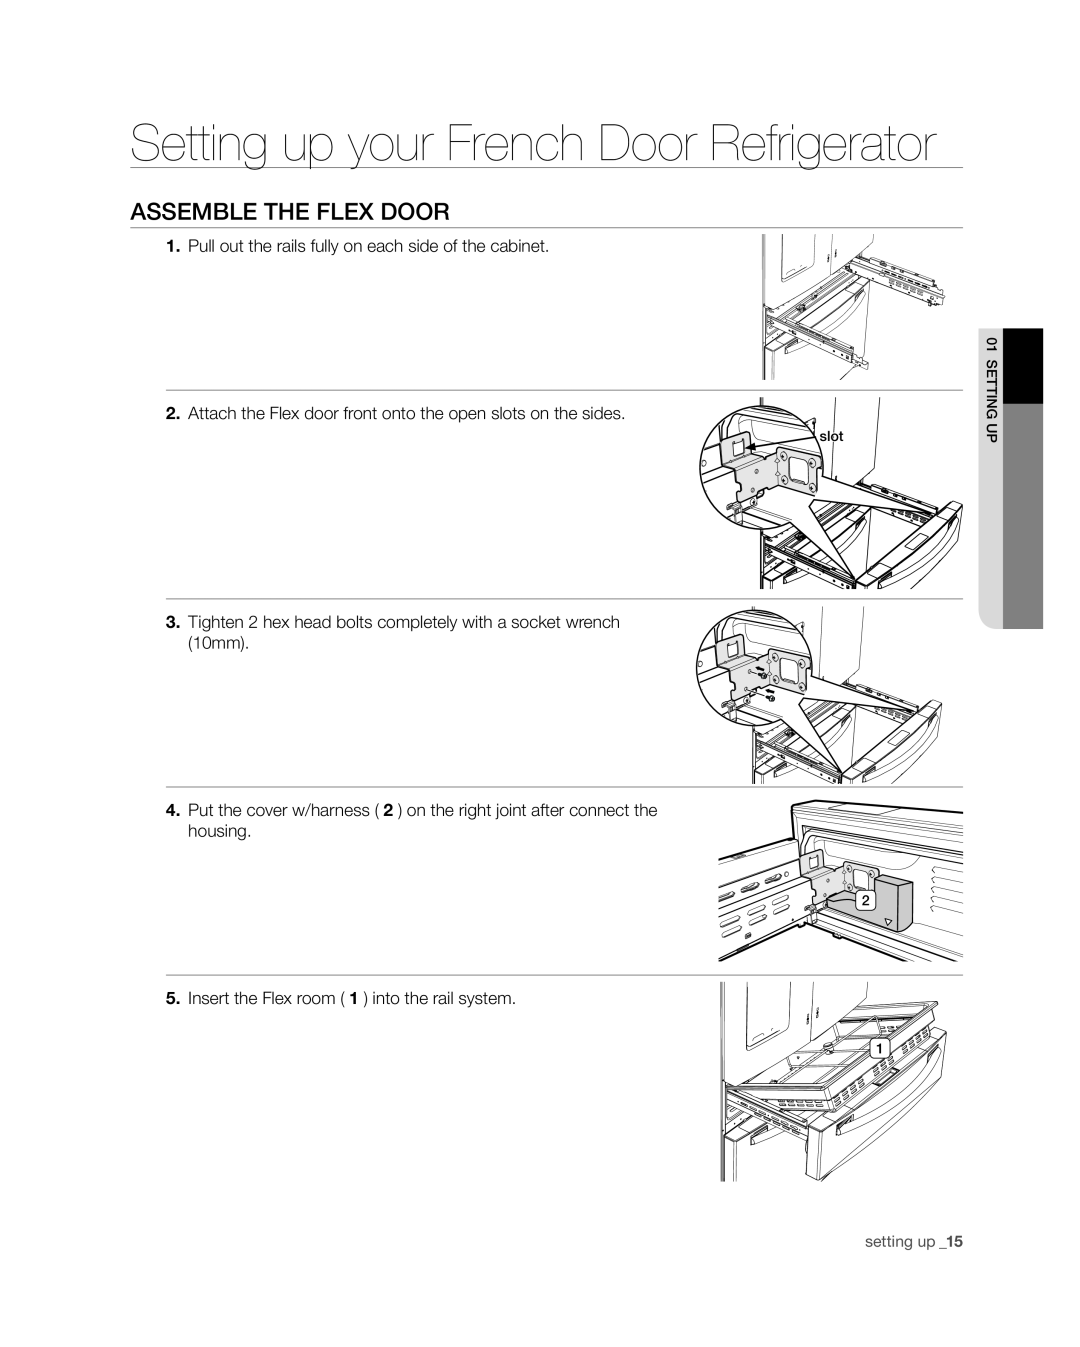 Samsung RF4287HA user manual assemble the Flex door, Setting up your French Door Refrigerator, setting up 